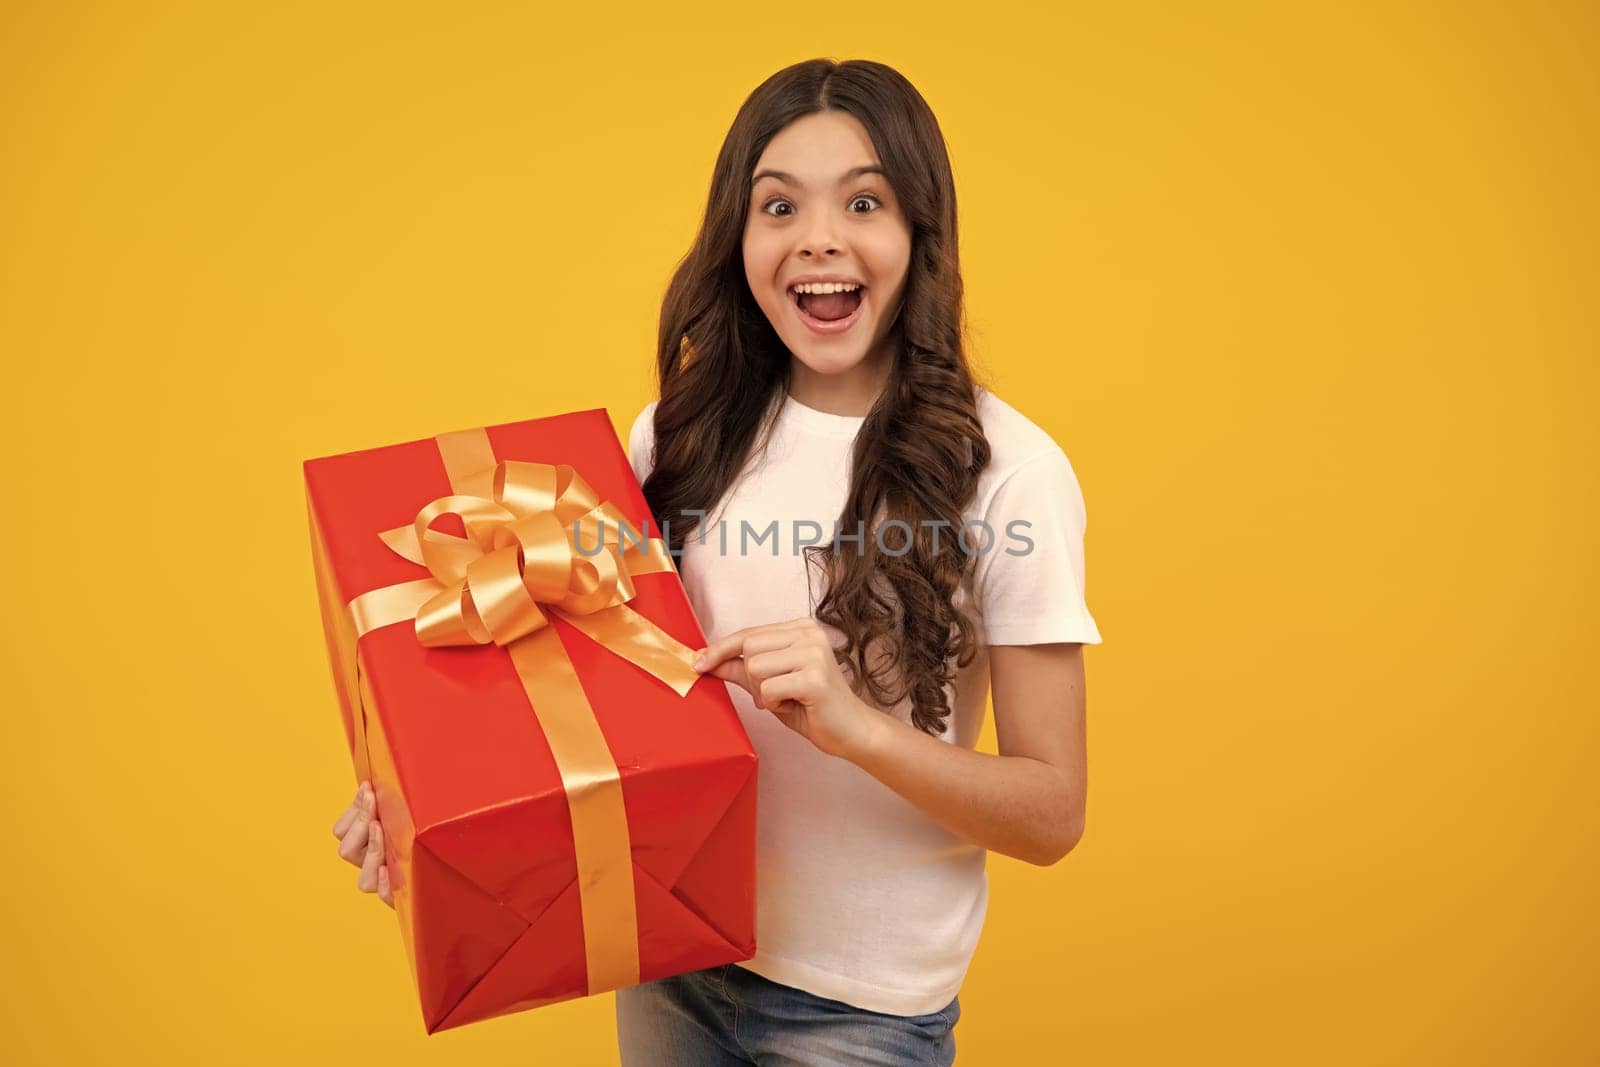 Amazed teenager. Child teen girl 12-14 years old with gift on yellow isolated background. Birthday, holiday present concept. Excited teen girl